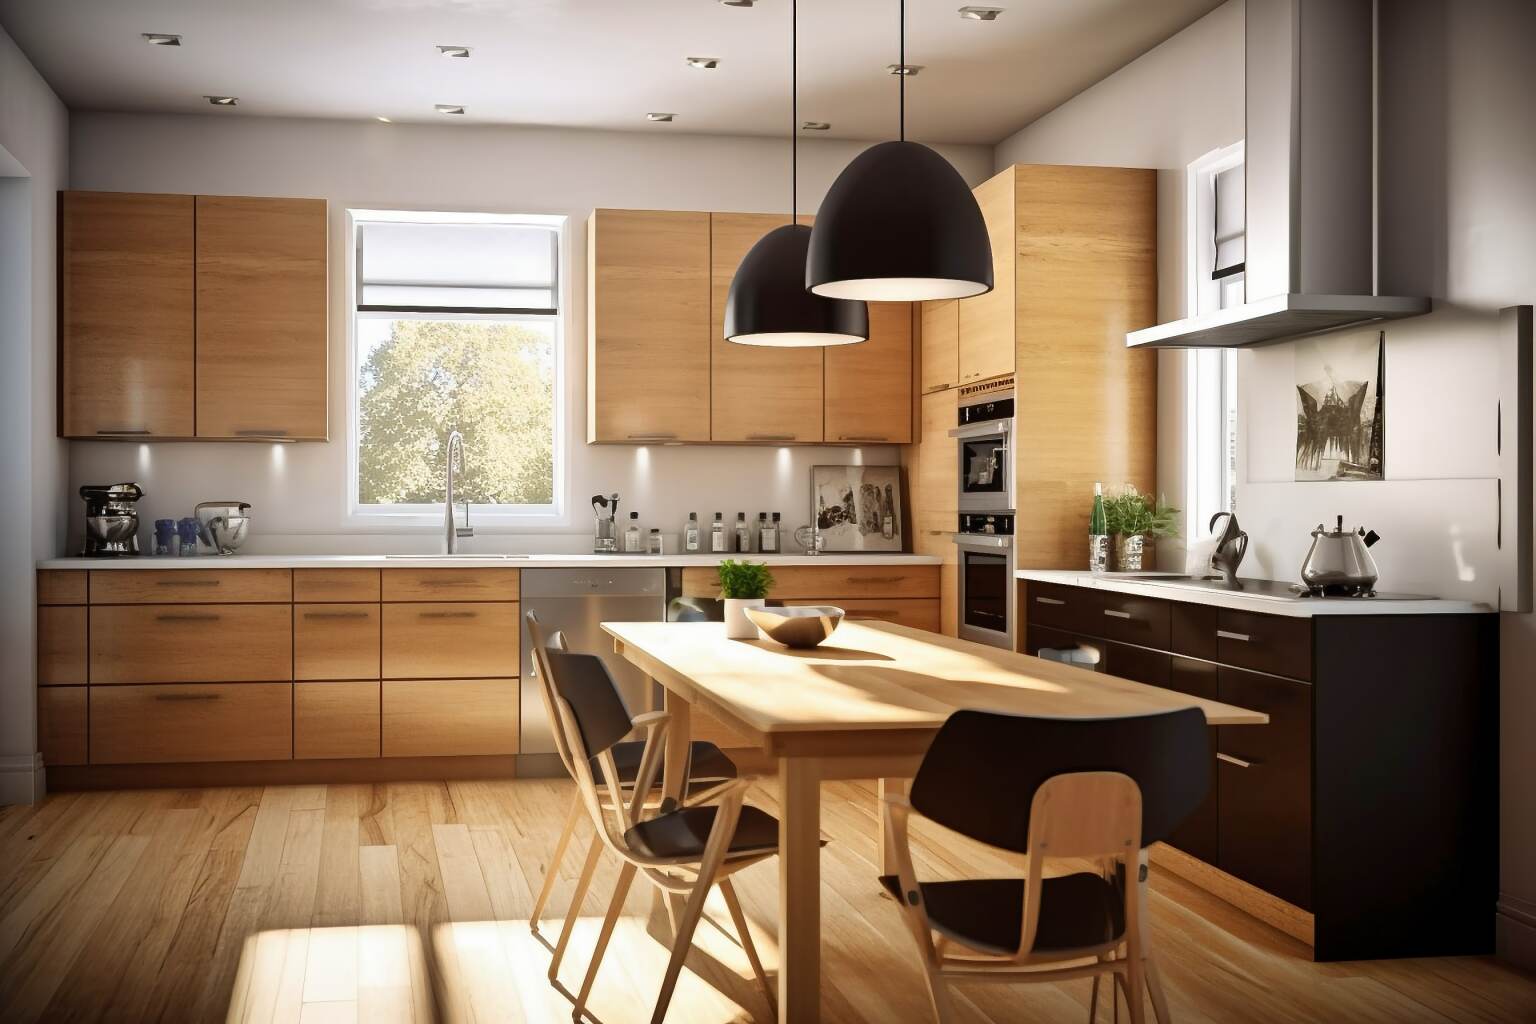 Snapshot Of A Scandinavian Style Kitchen With Metal And Wood